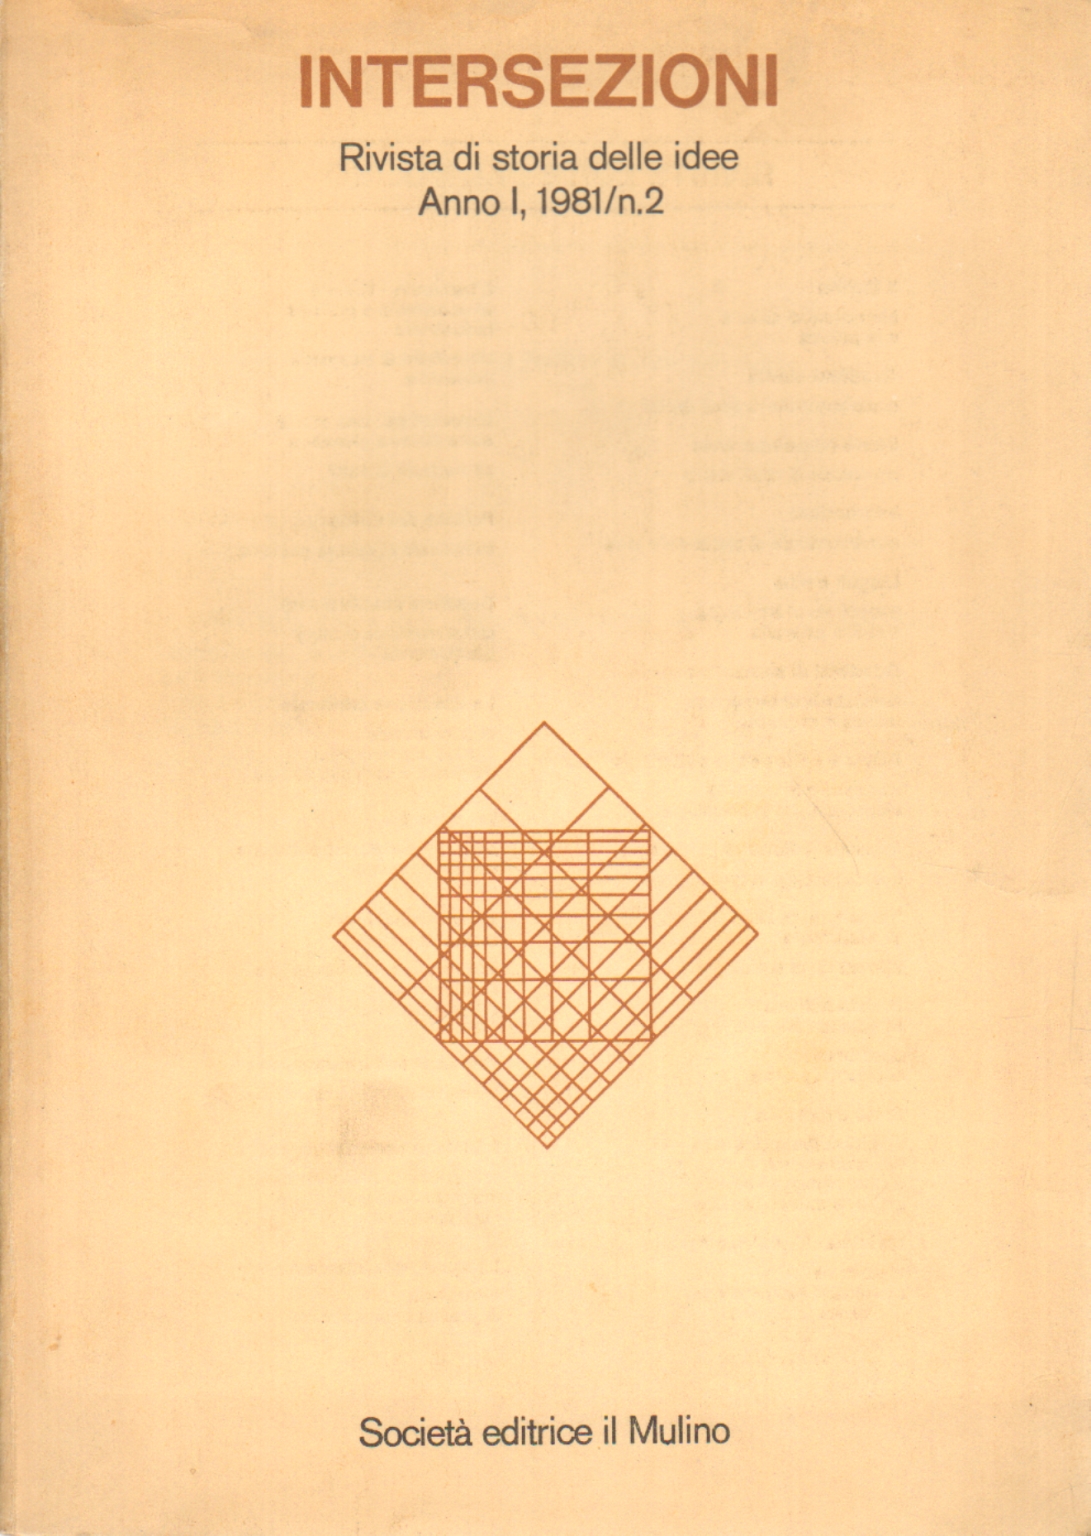 Intersections, Journal of the history of ideas Year I , AA.VV.